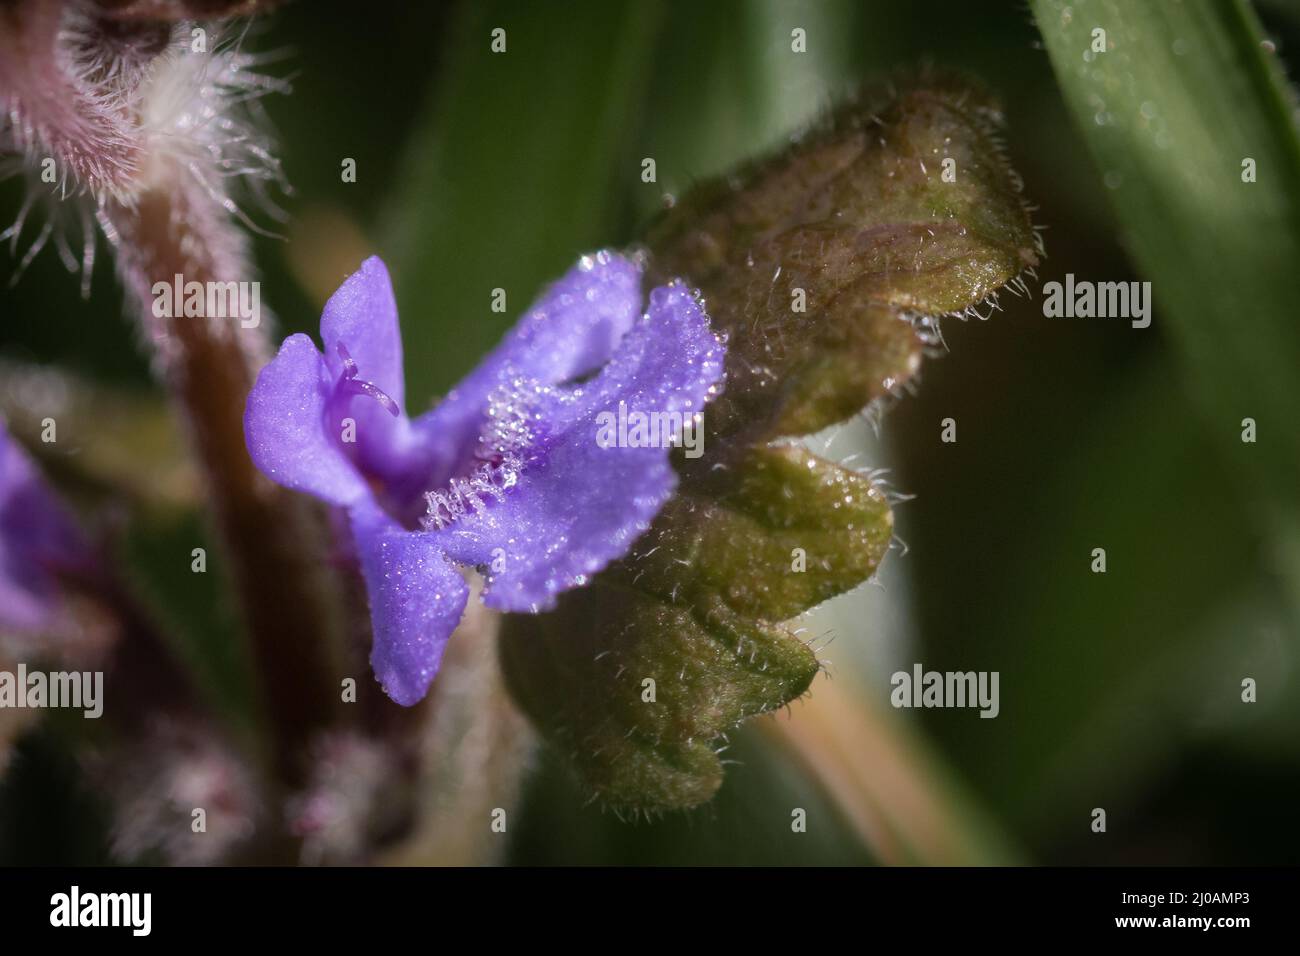 Close up image of the flower of a ground ivy (Glechoma hederacea) showing the dew covered hairs that cover the petals and catch the insects as they enter. Found at Wayland wood in Norfolk Stock Photo